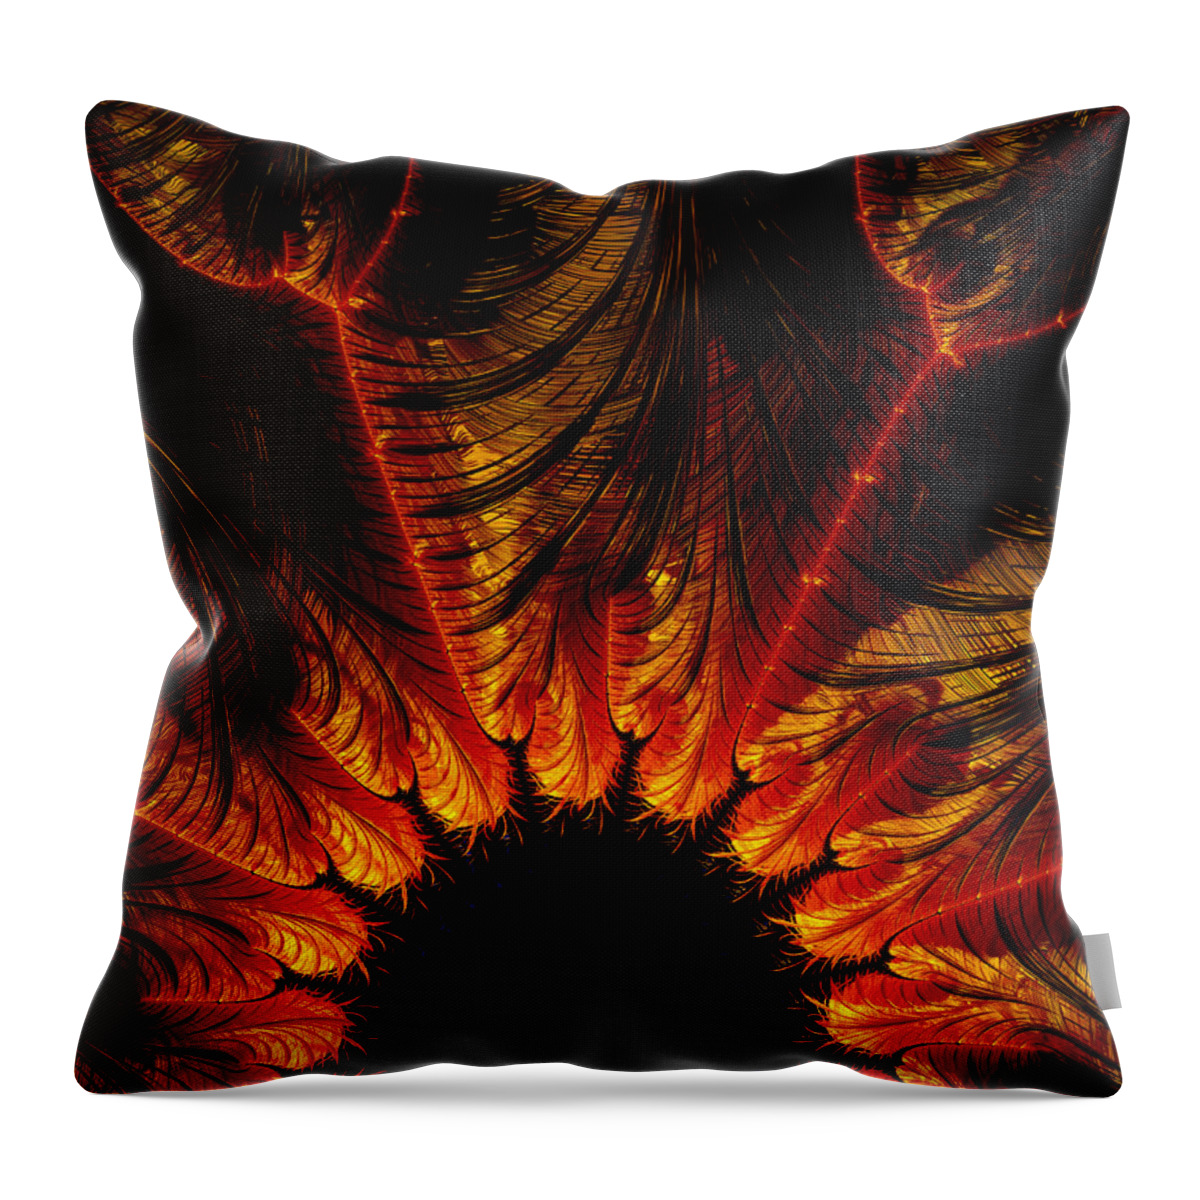 Art Throw Pillow featuring the digital art Unbridgeable Chasm-x by Jeff Iverson